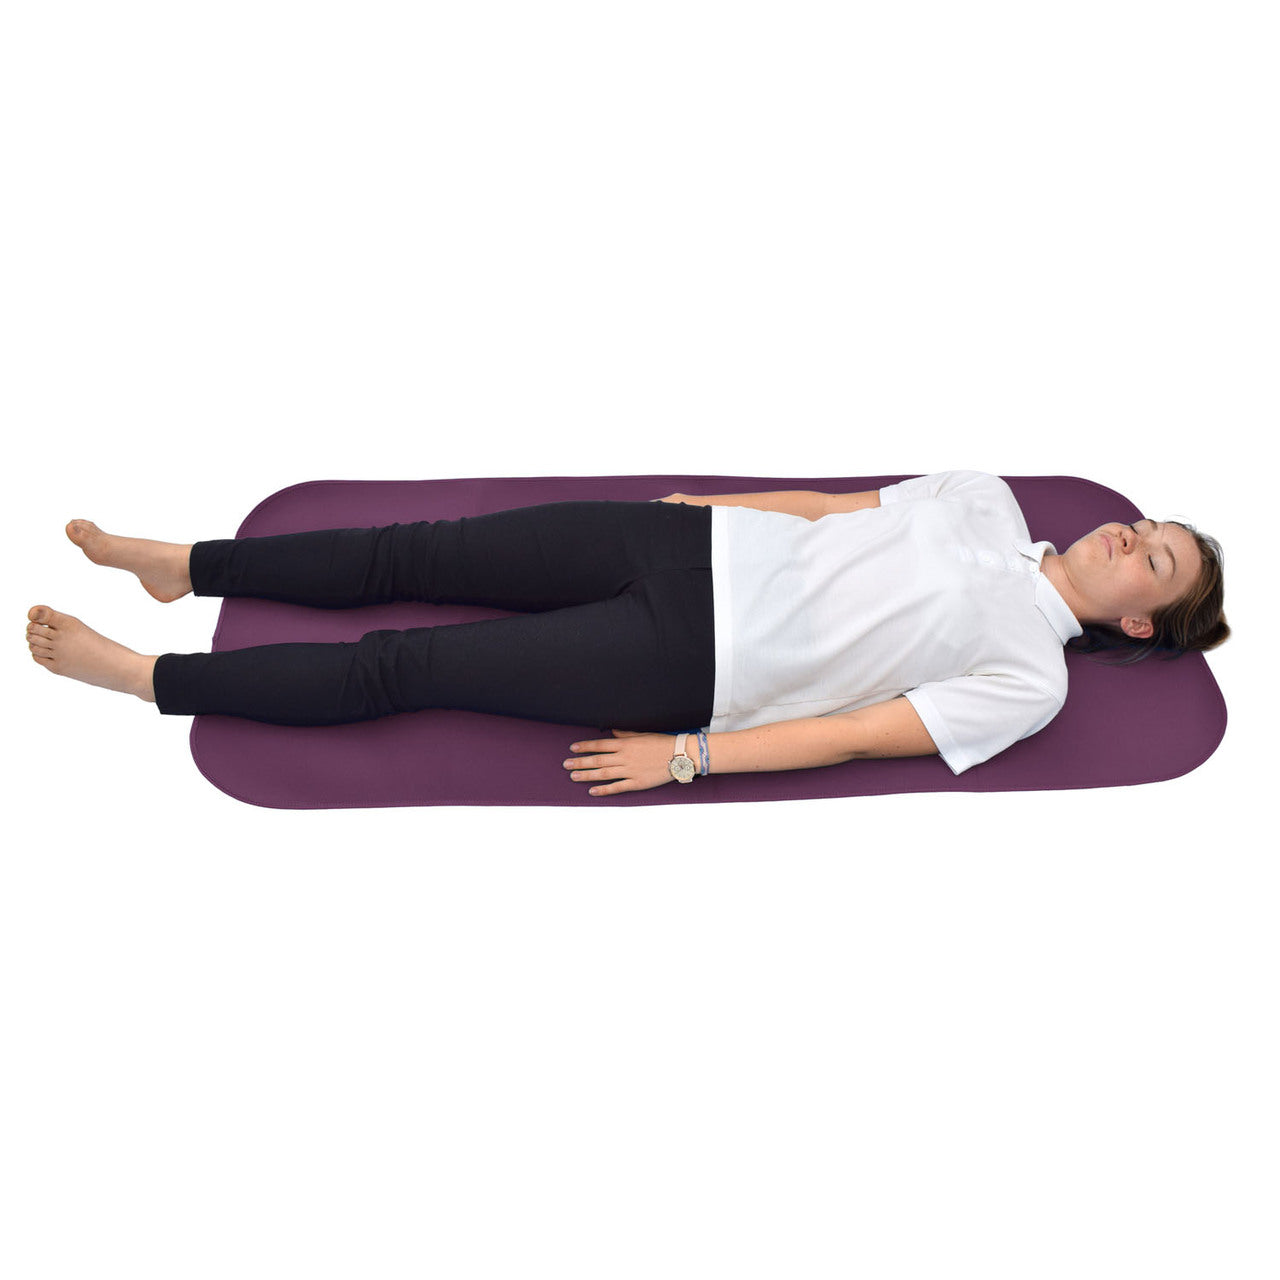 Adult and Teenager Changing Mat - Aubergine/Black (UK TAX Exempt) | Incontinence Aids | Care Designs